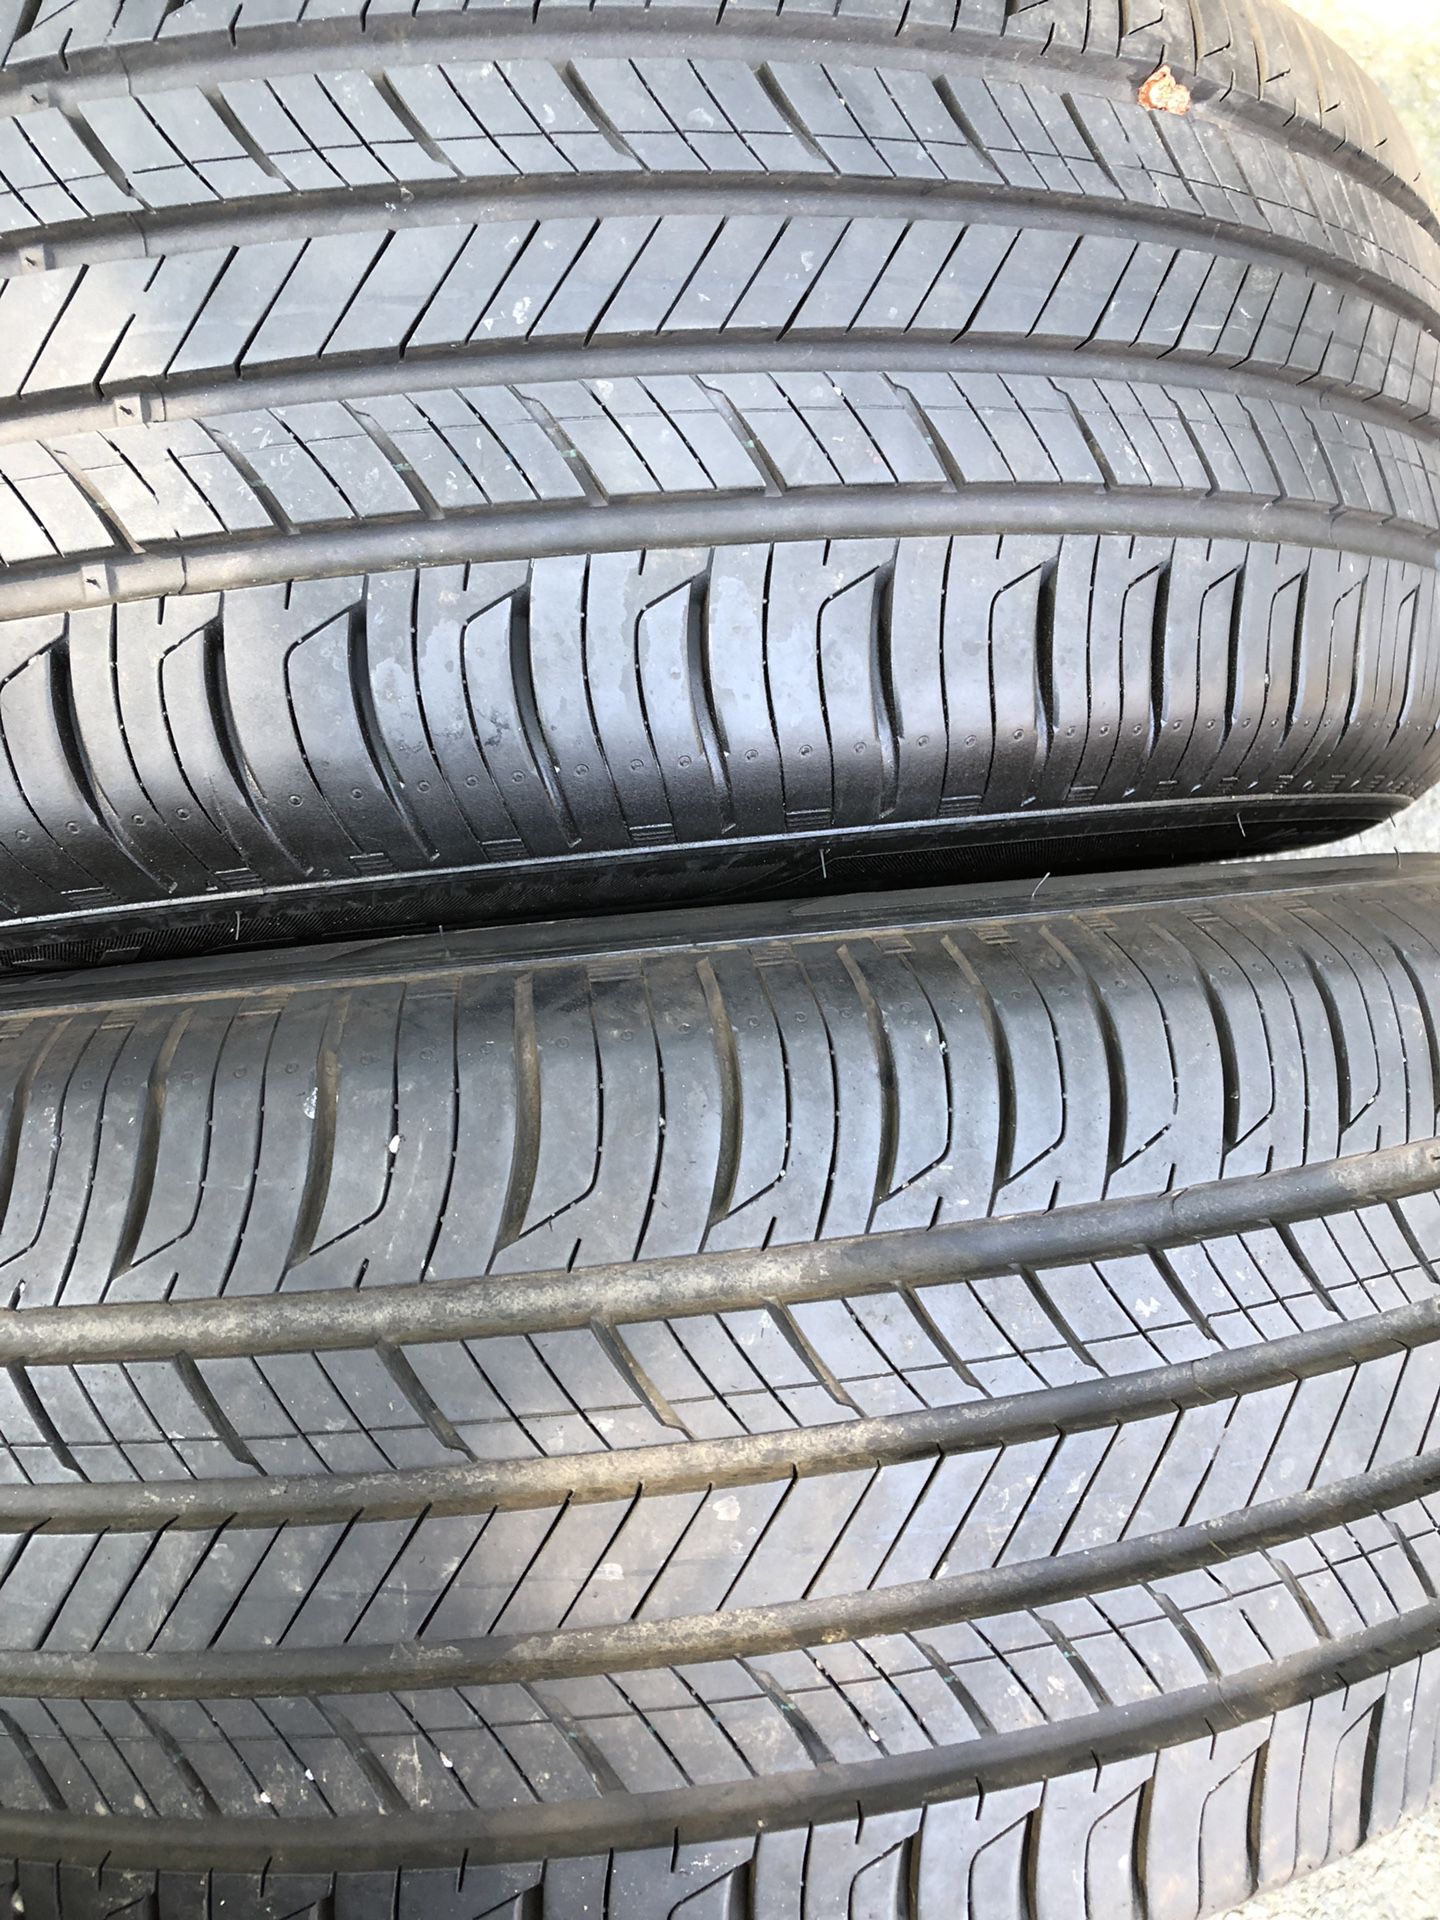 Two used tire 235/60R18 HANKOOK two used tire have patch two used tire $150 2 llantas usadas 235/60R18 HANKOOK las 2 tienen parche por las 2 $150